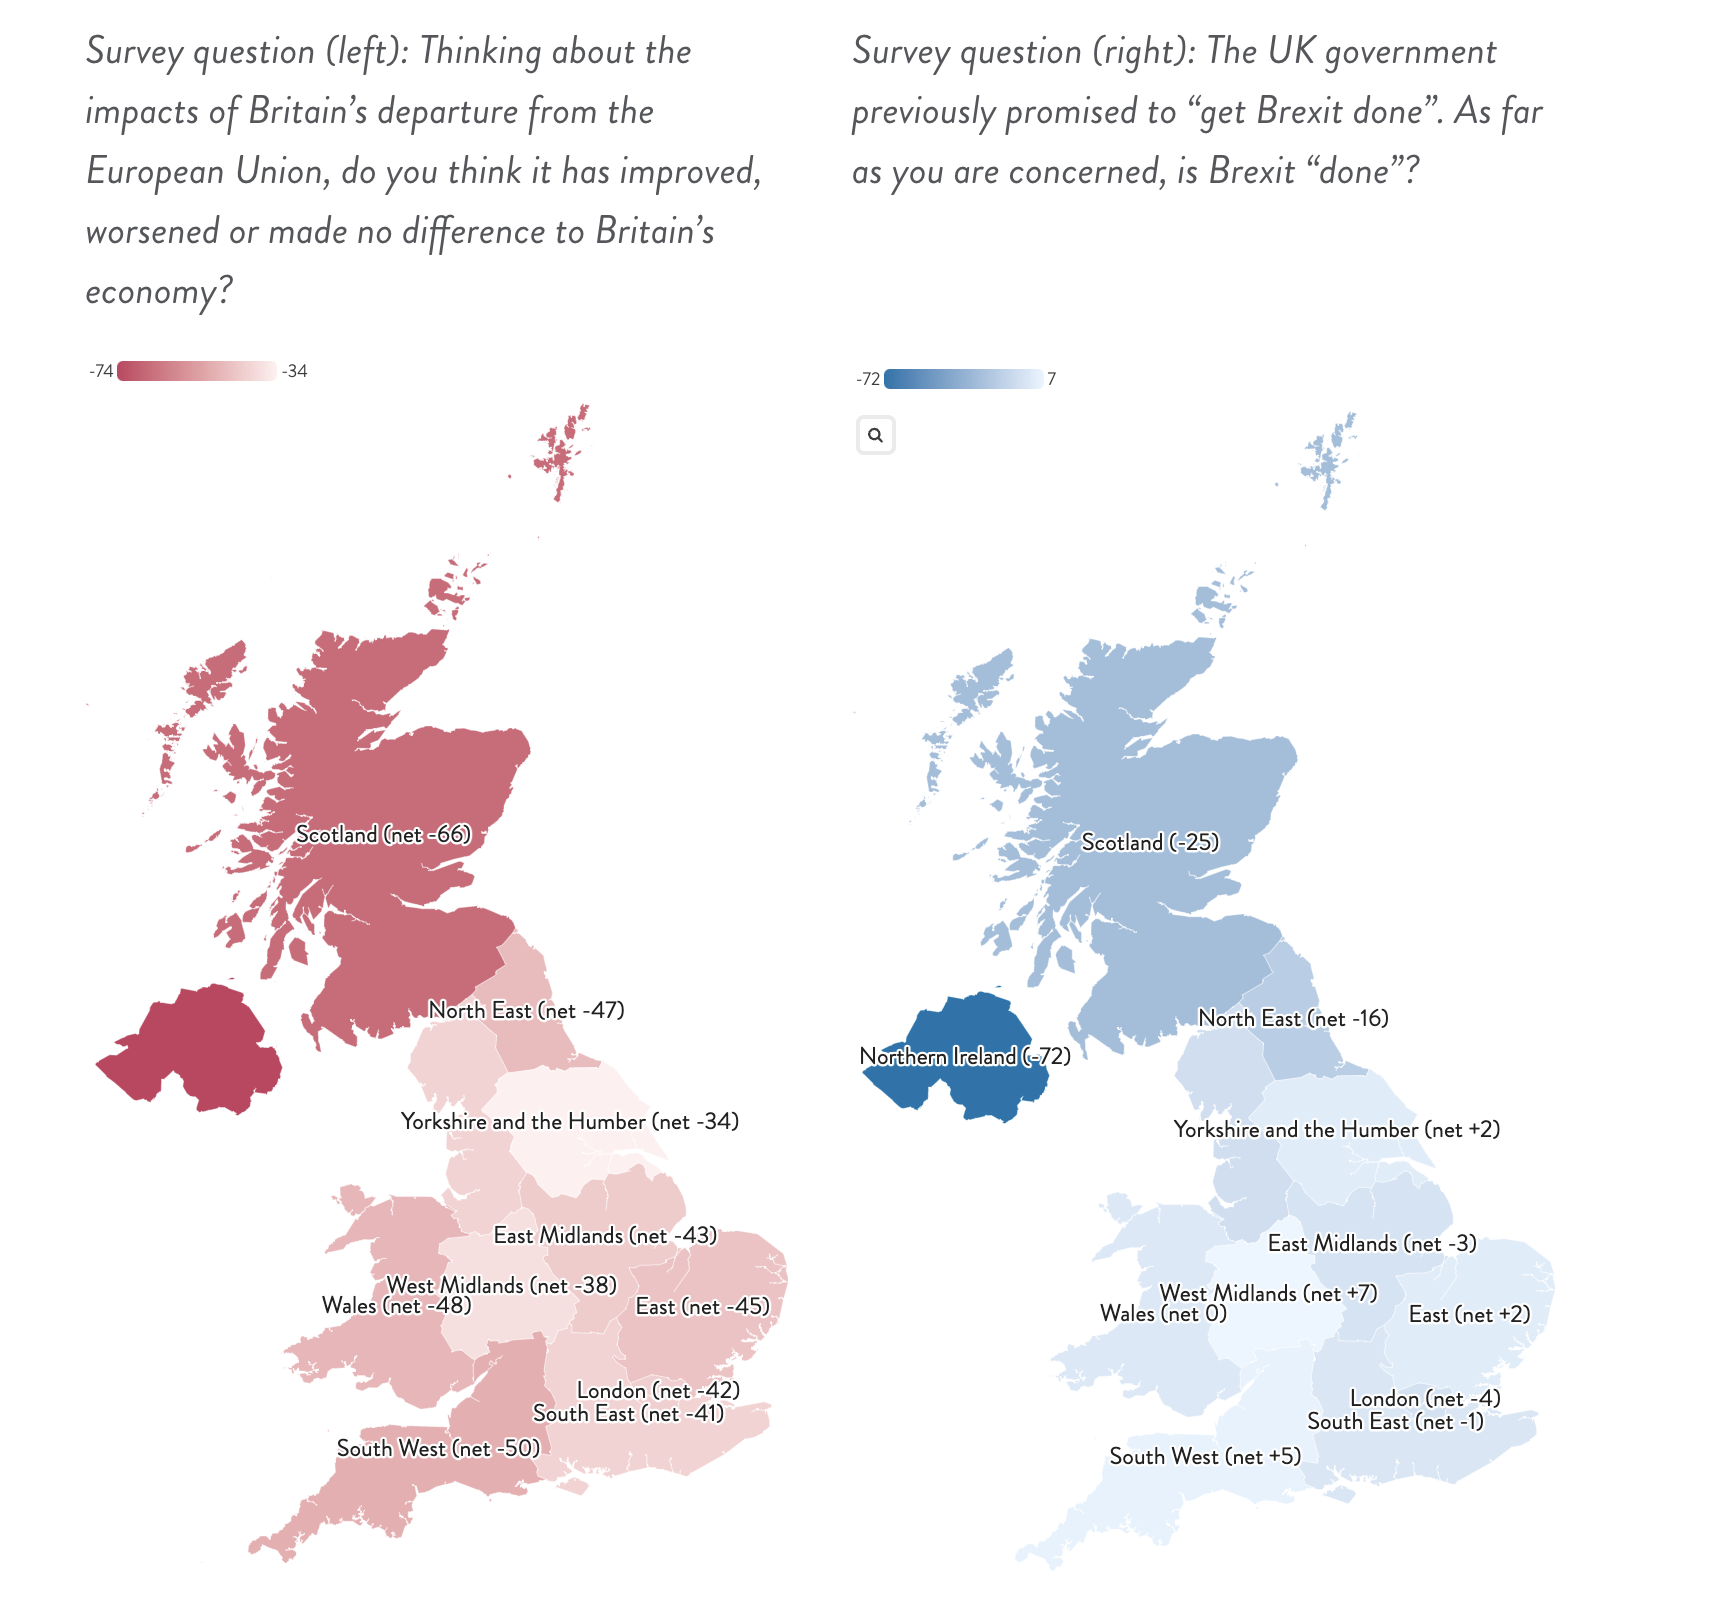 Figure 7 – There are significant differences across the UK’s regions both in terms of the impacts of Brexit (left) and perception of whether Brexit is “done” (right)